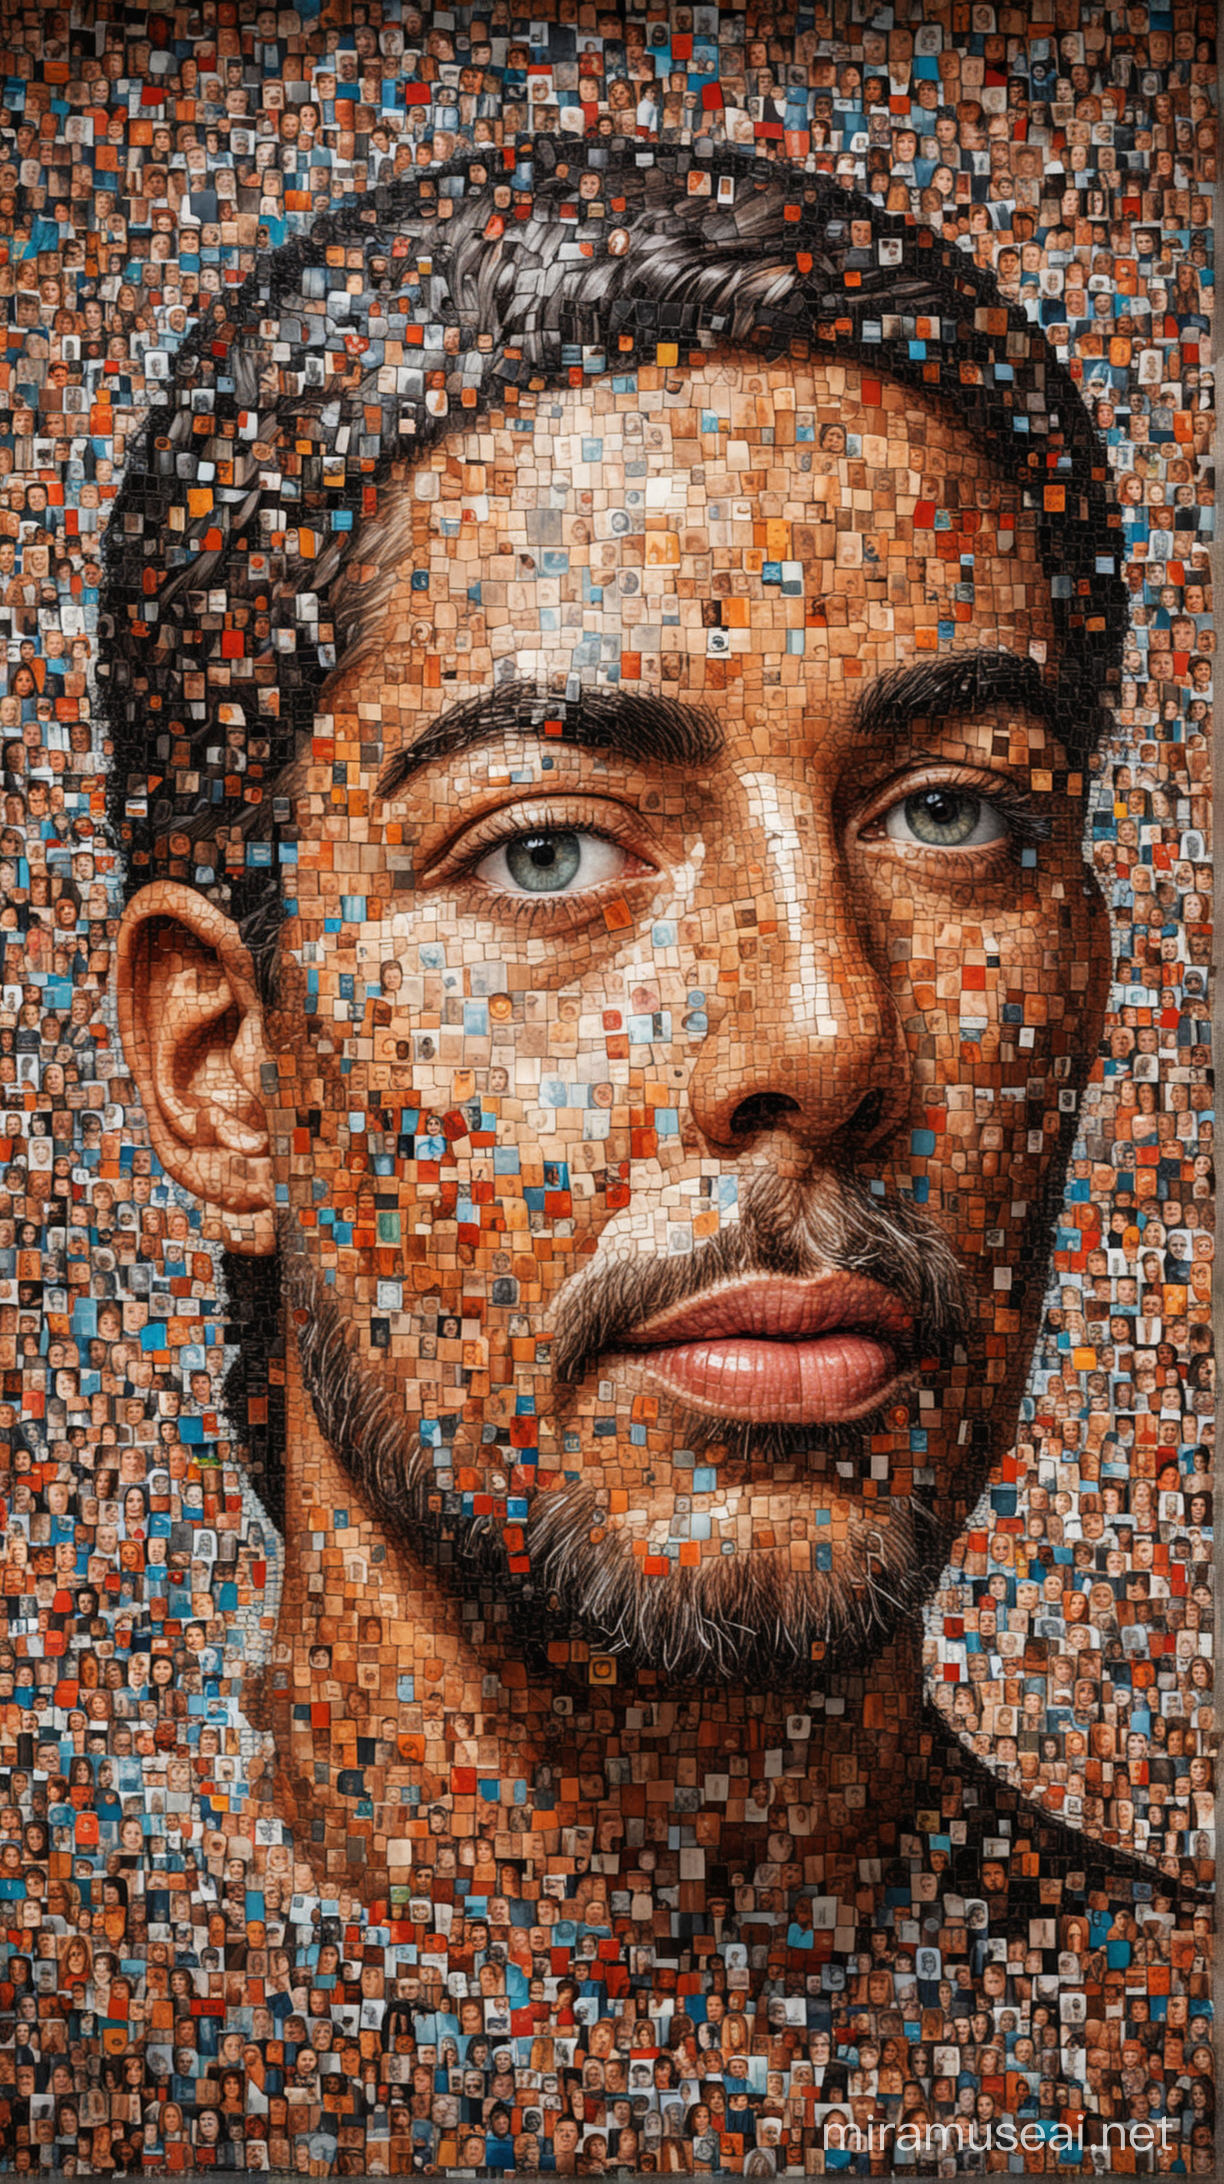  A vibrant mosaic of portraits forming a speech bubble, representing a multitude of voices.